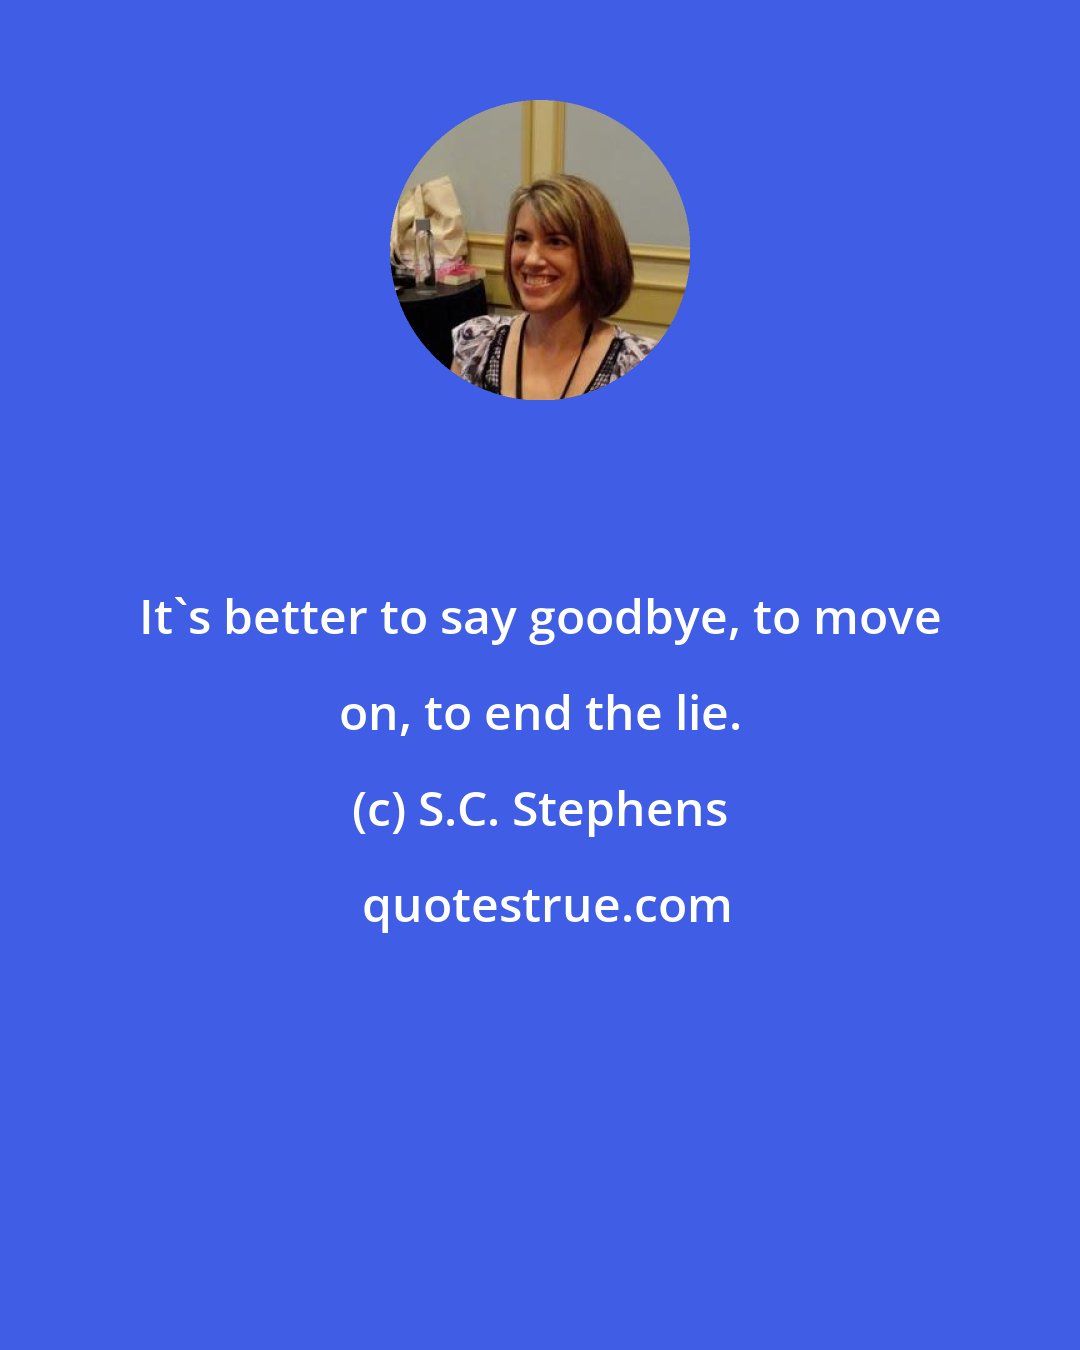 S.C. Stephens: It's better to say goodbye, to move on, to end the lie.